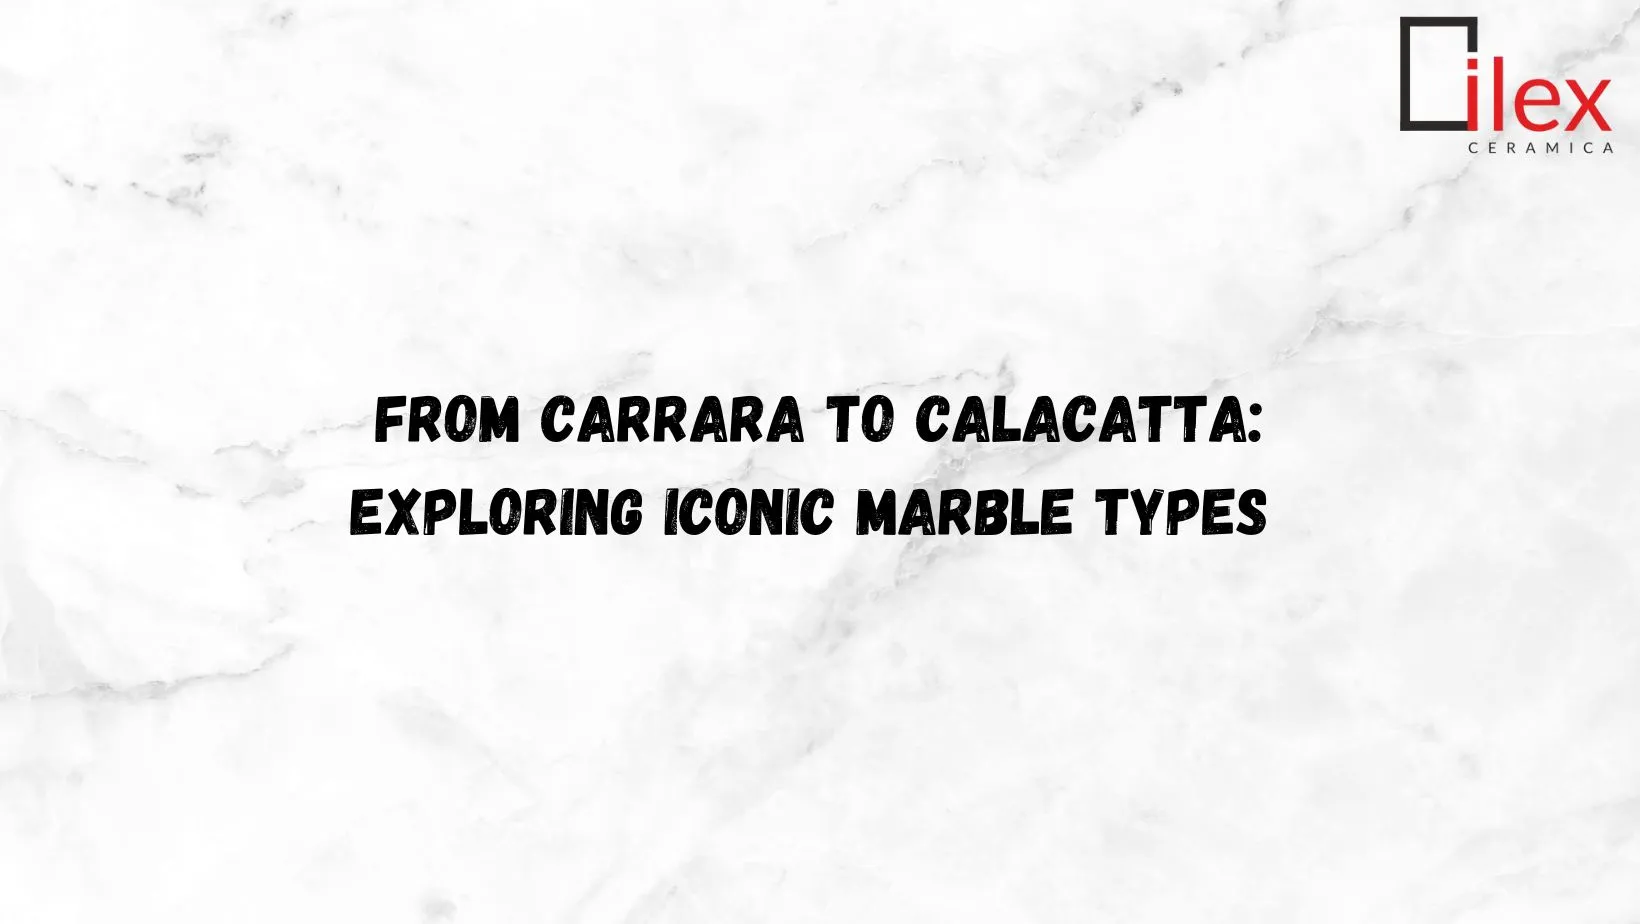 From Carrara to Calacatta: Exploring Iconic Marble Types